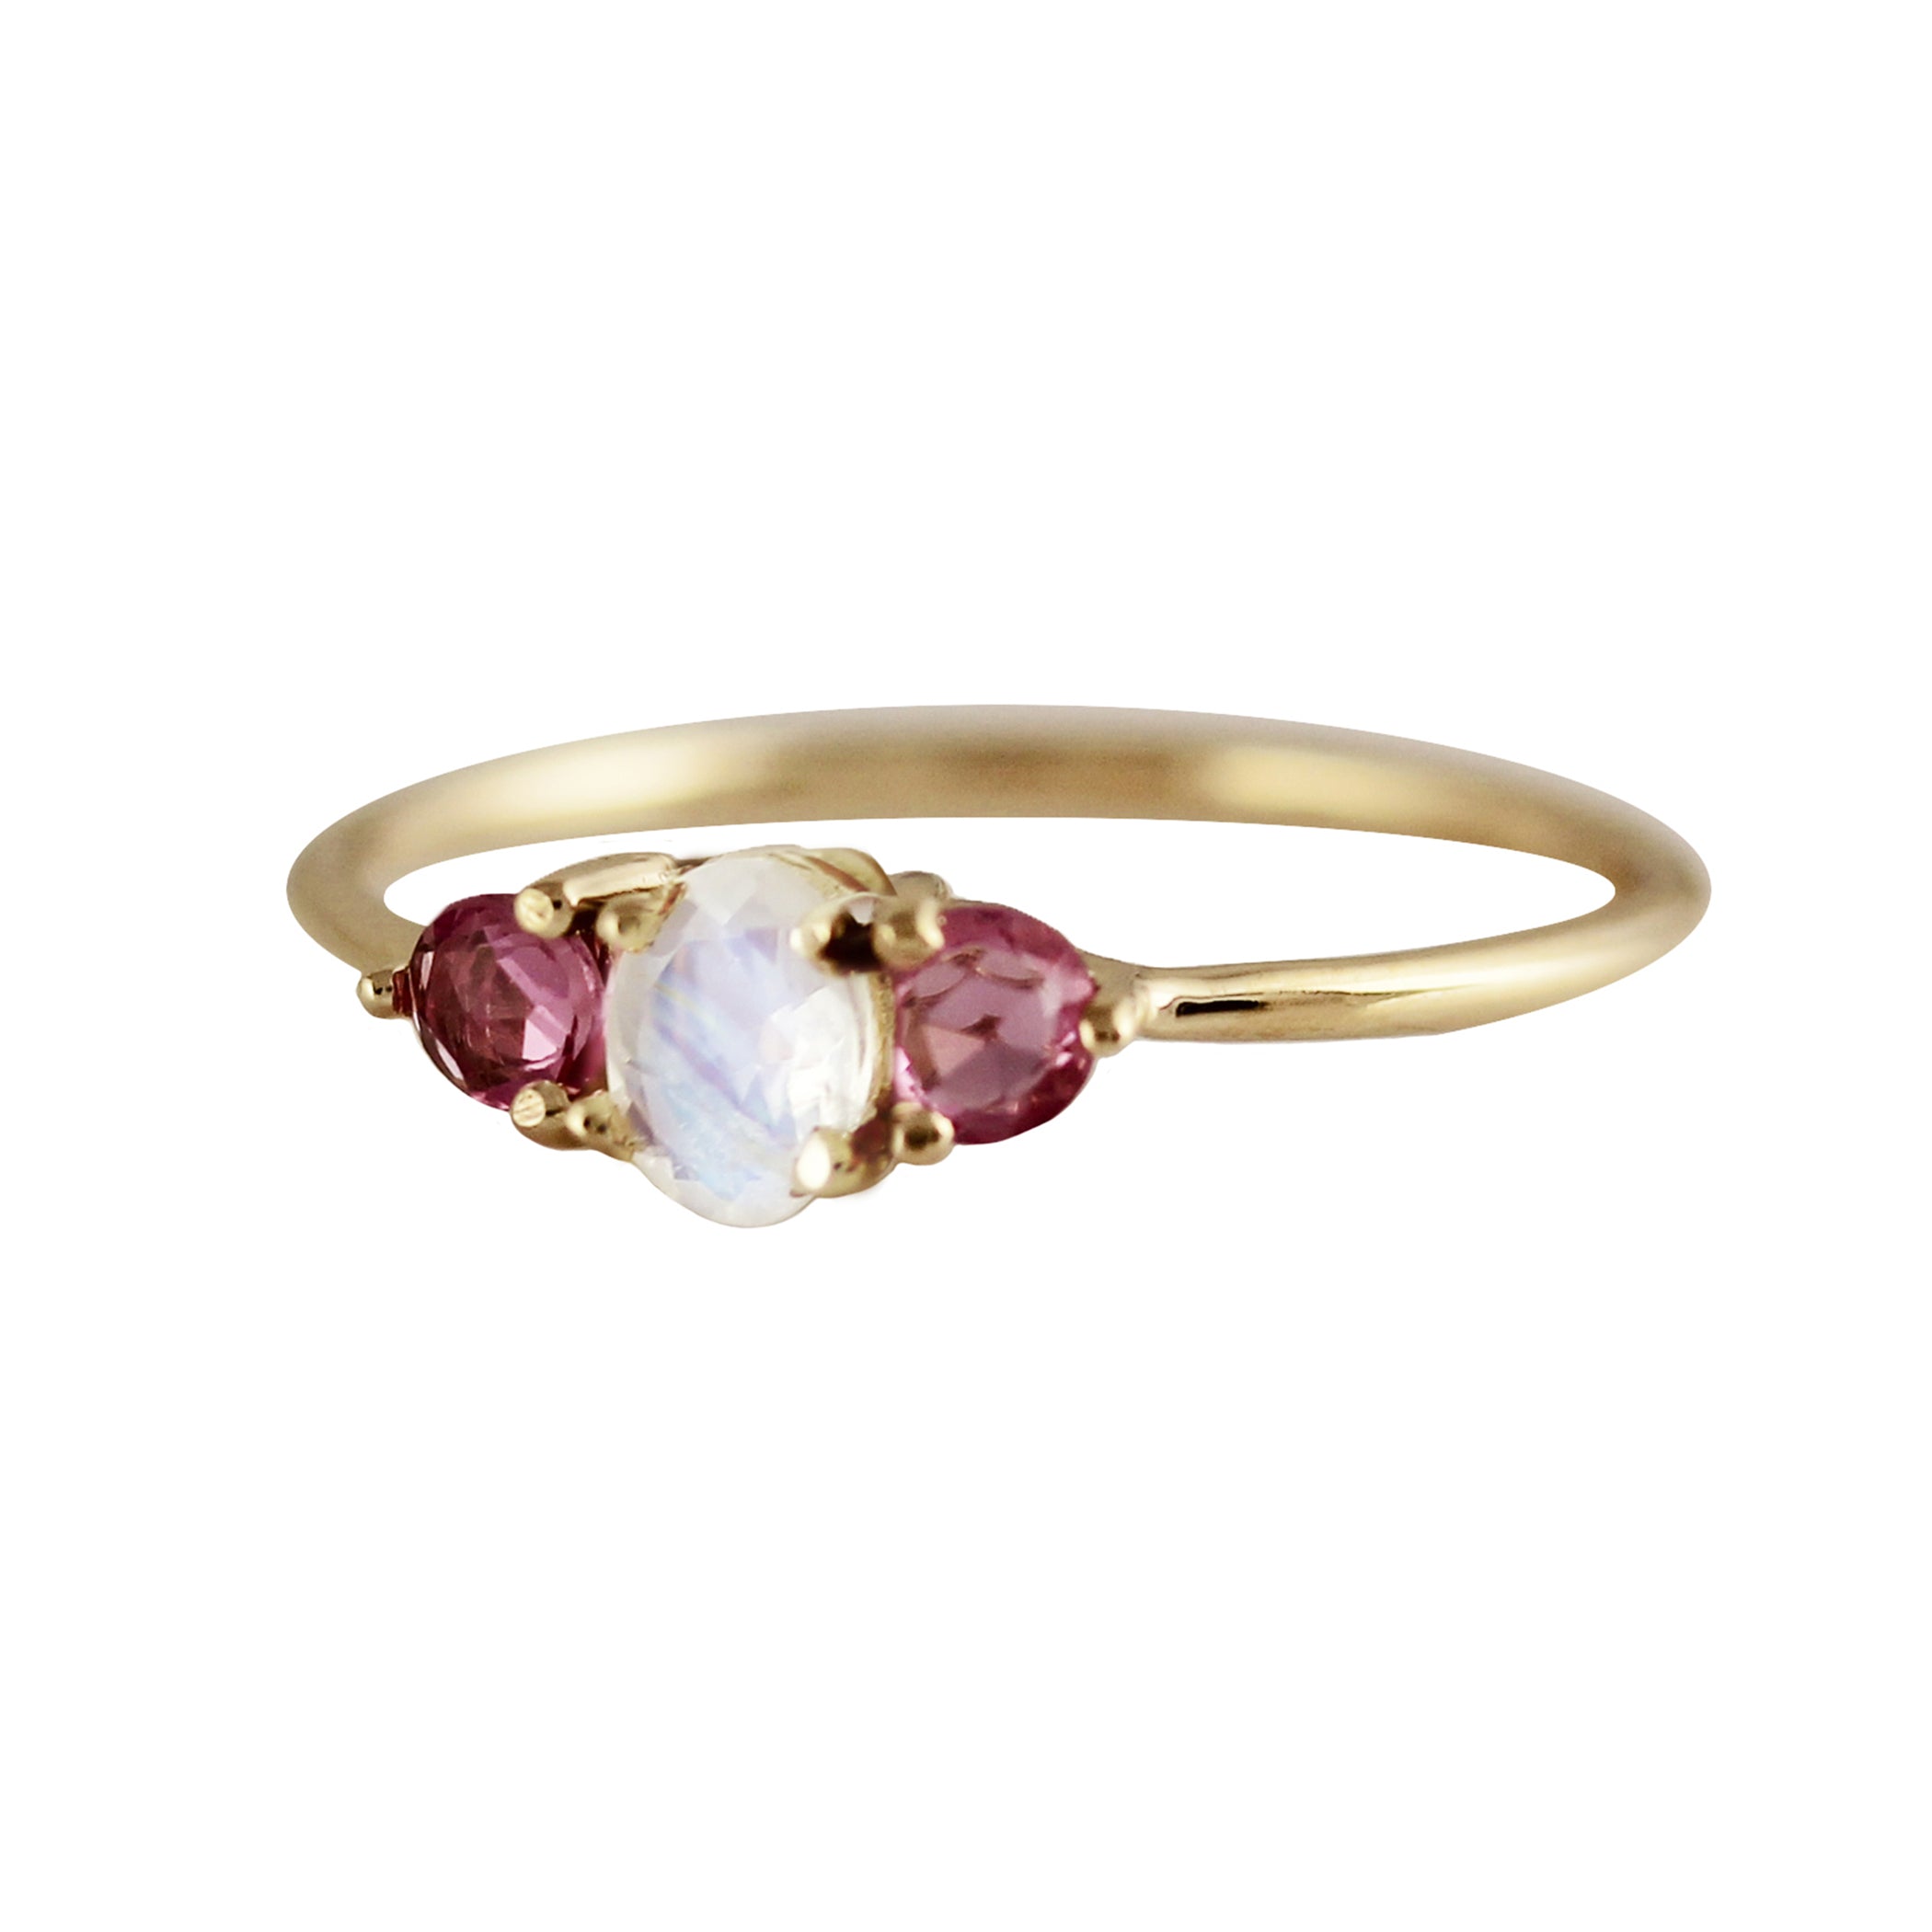 FAIRYTALE MAGIC - PINK MOONSTONE RING – Bee's Bling Bash